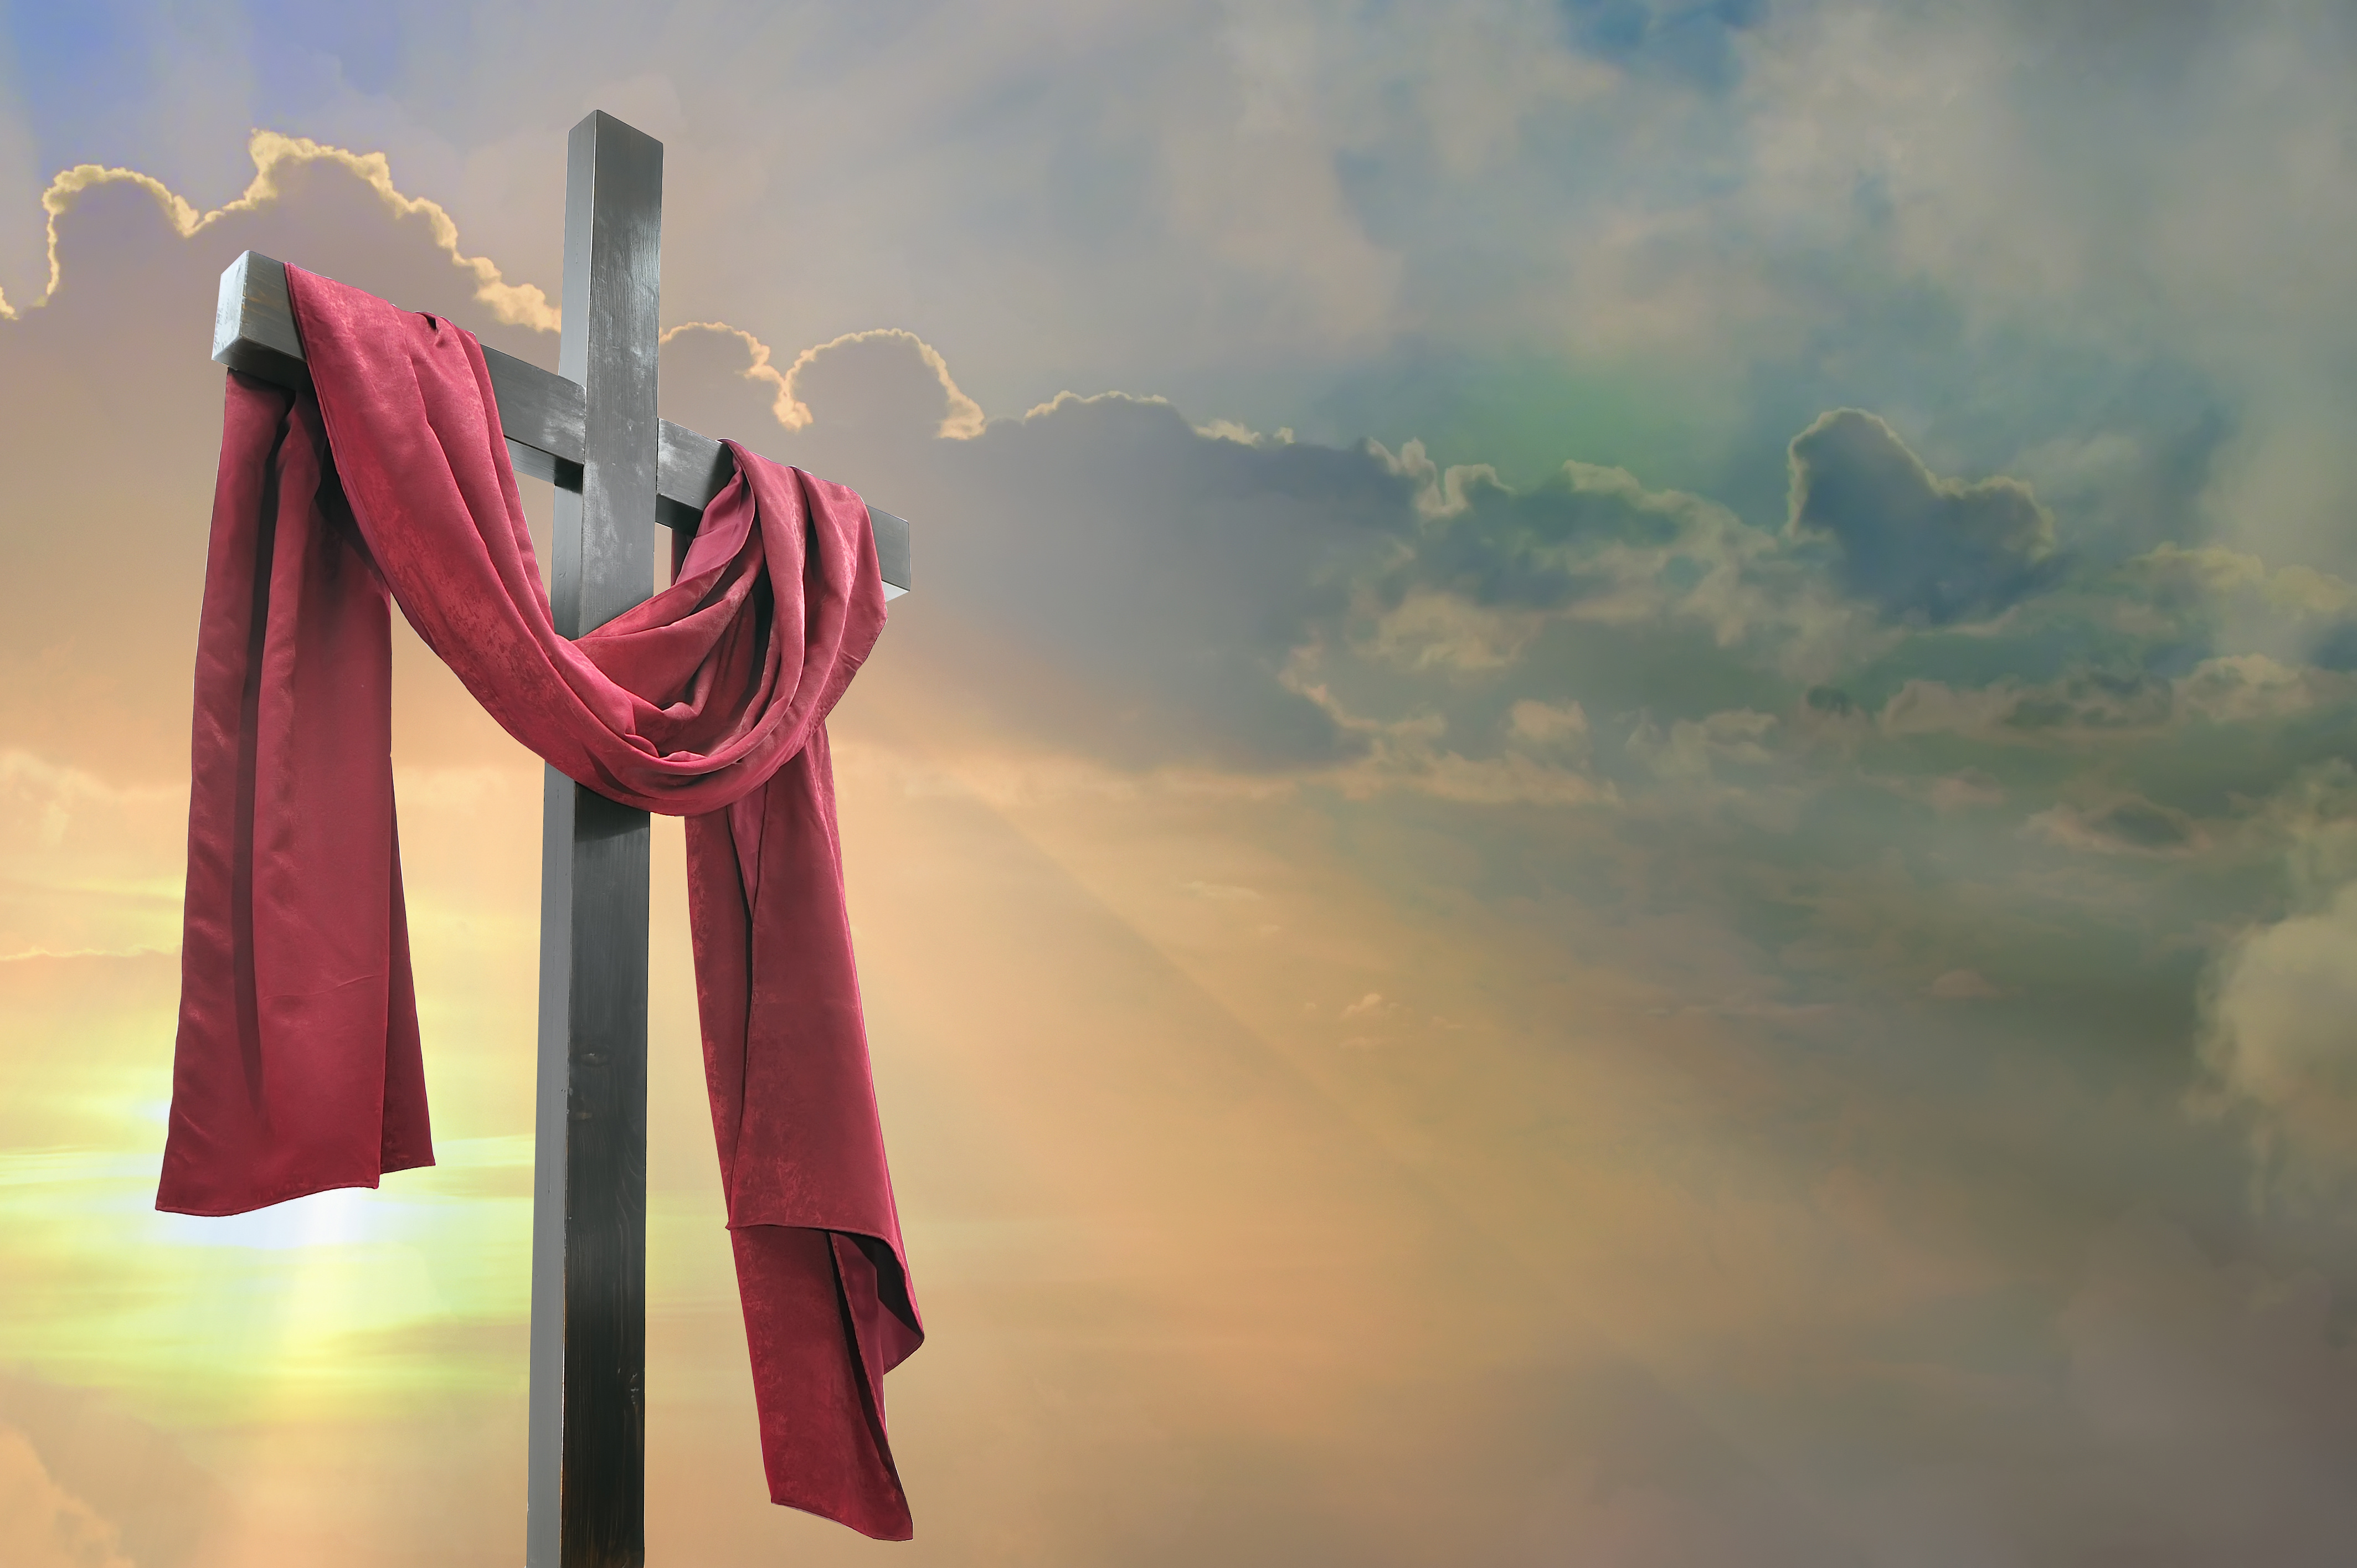 Cross Against The Sky - Happy Easter Images Hd - 4256x2832 Wallpaper -  